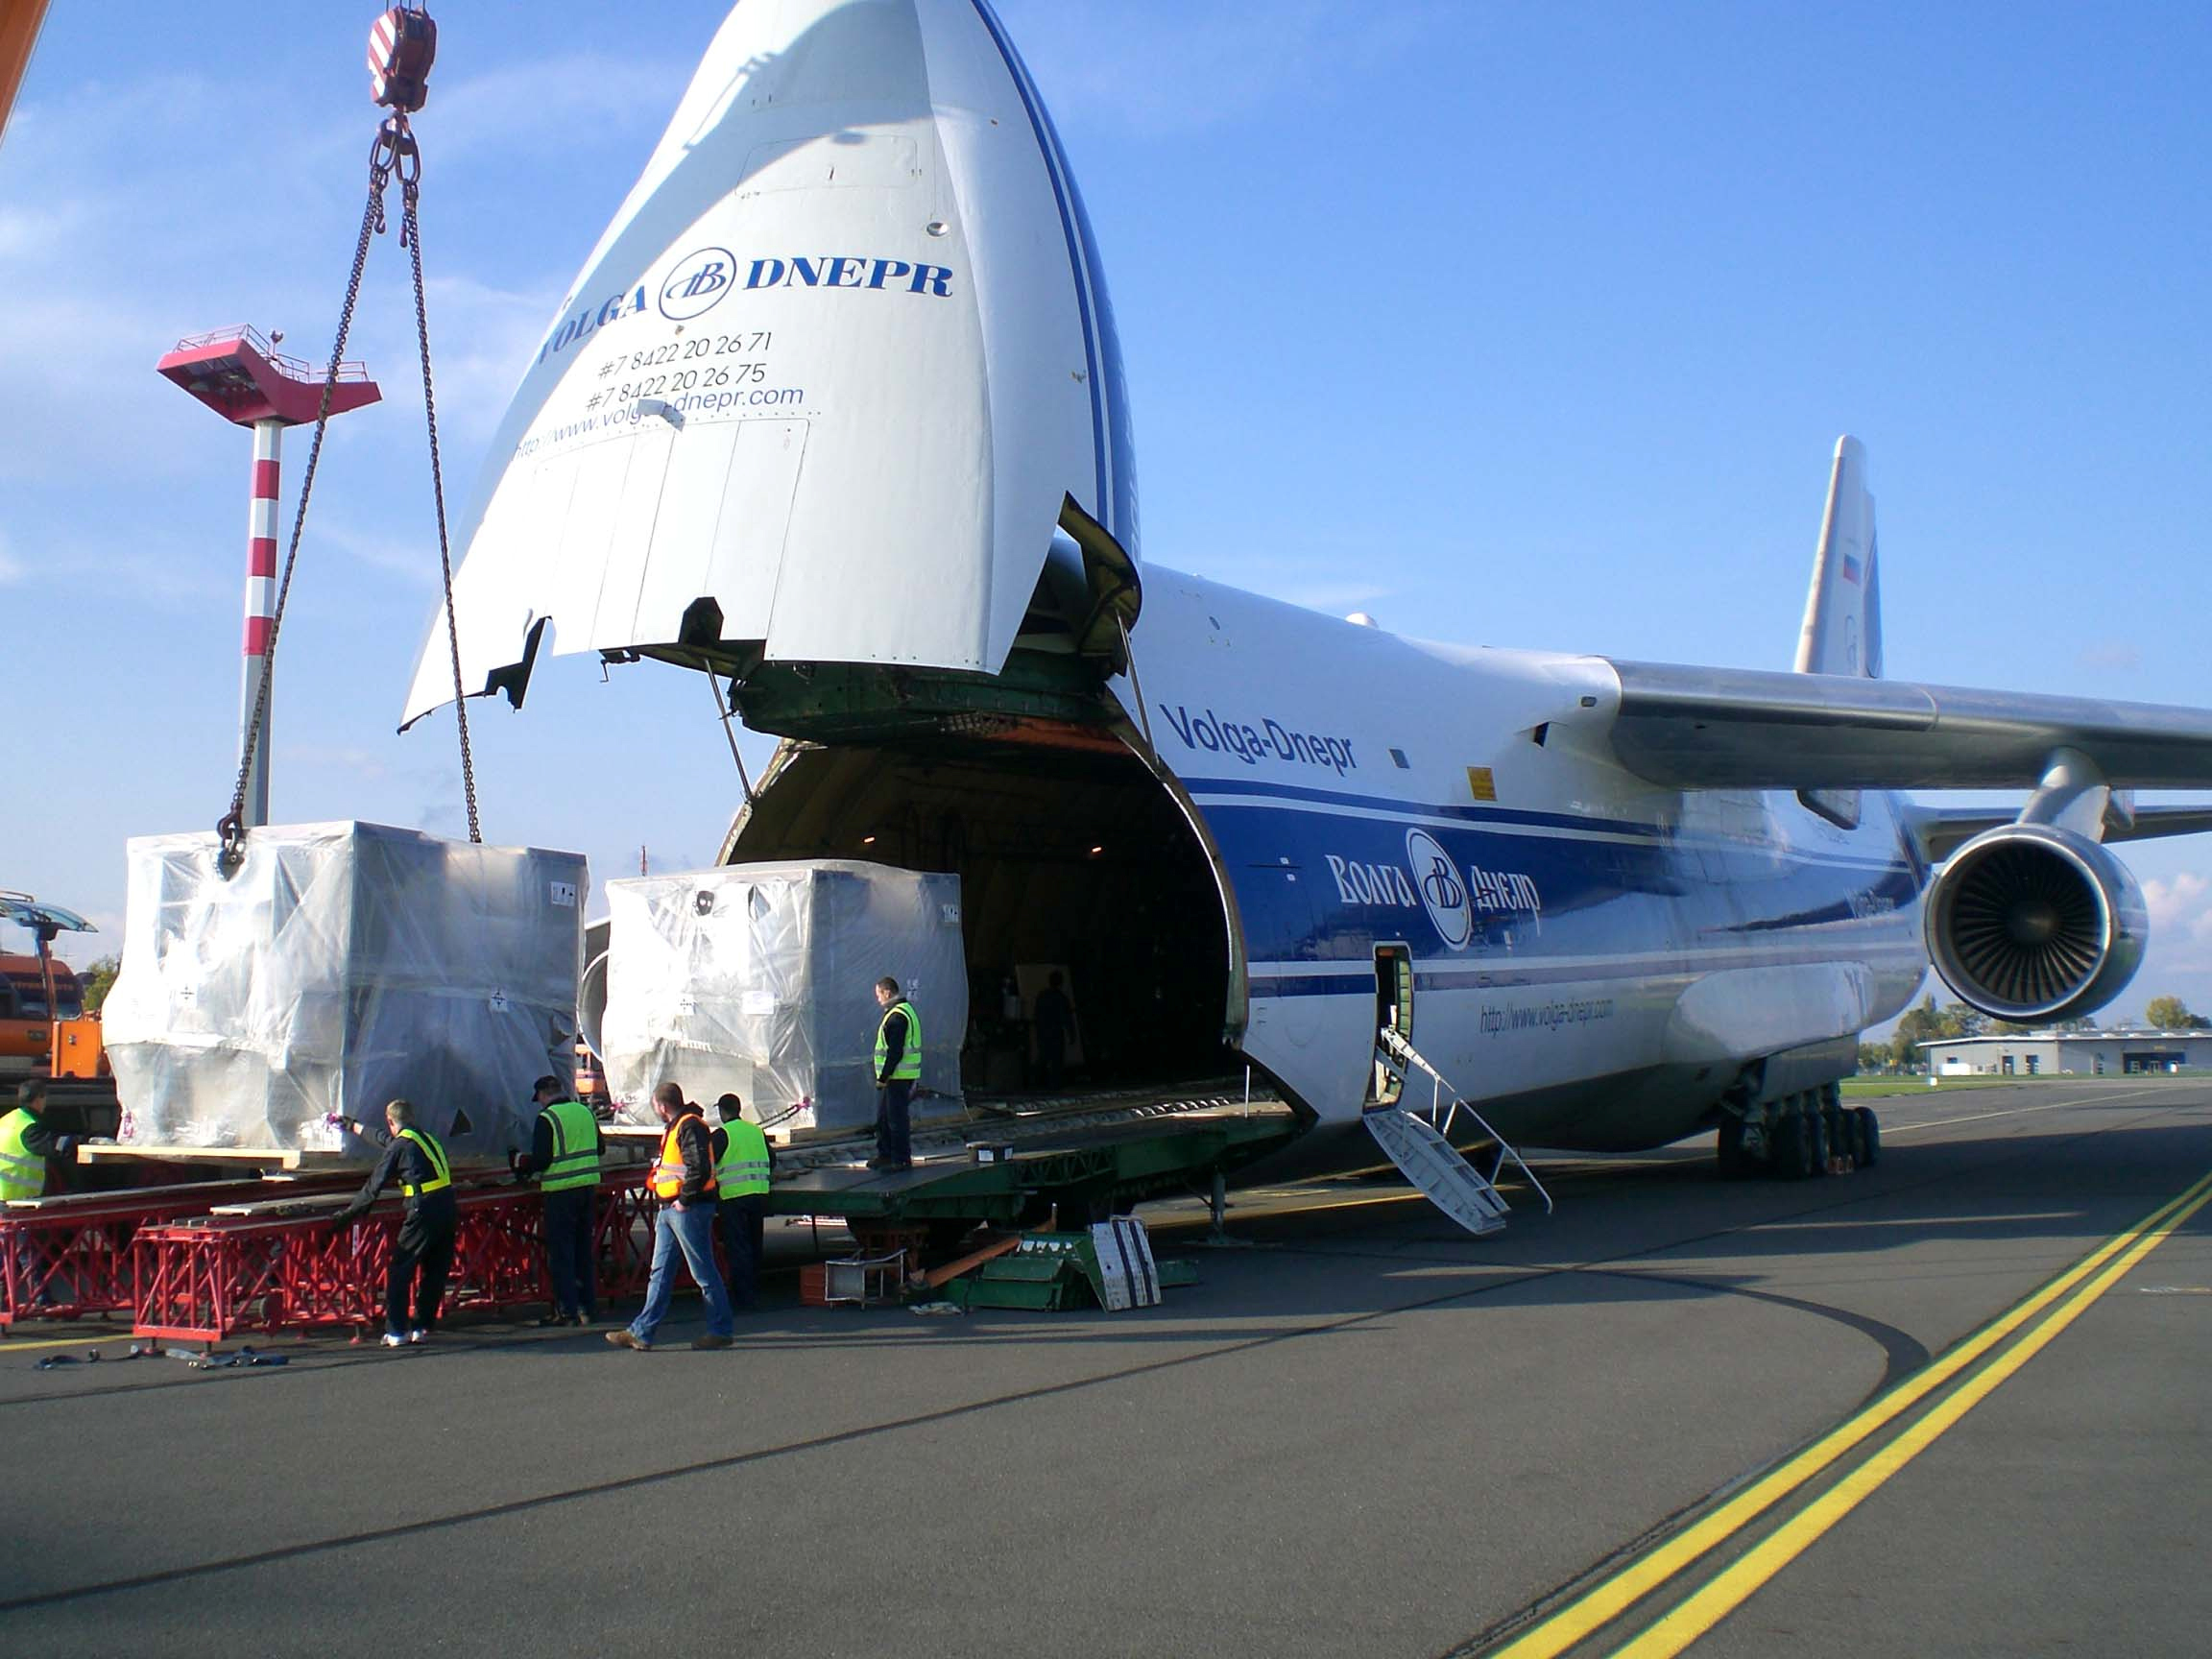 Air Cargo Freight Courier Services